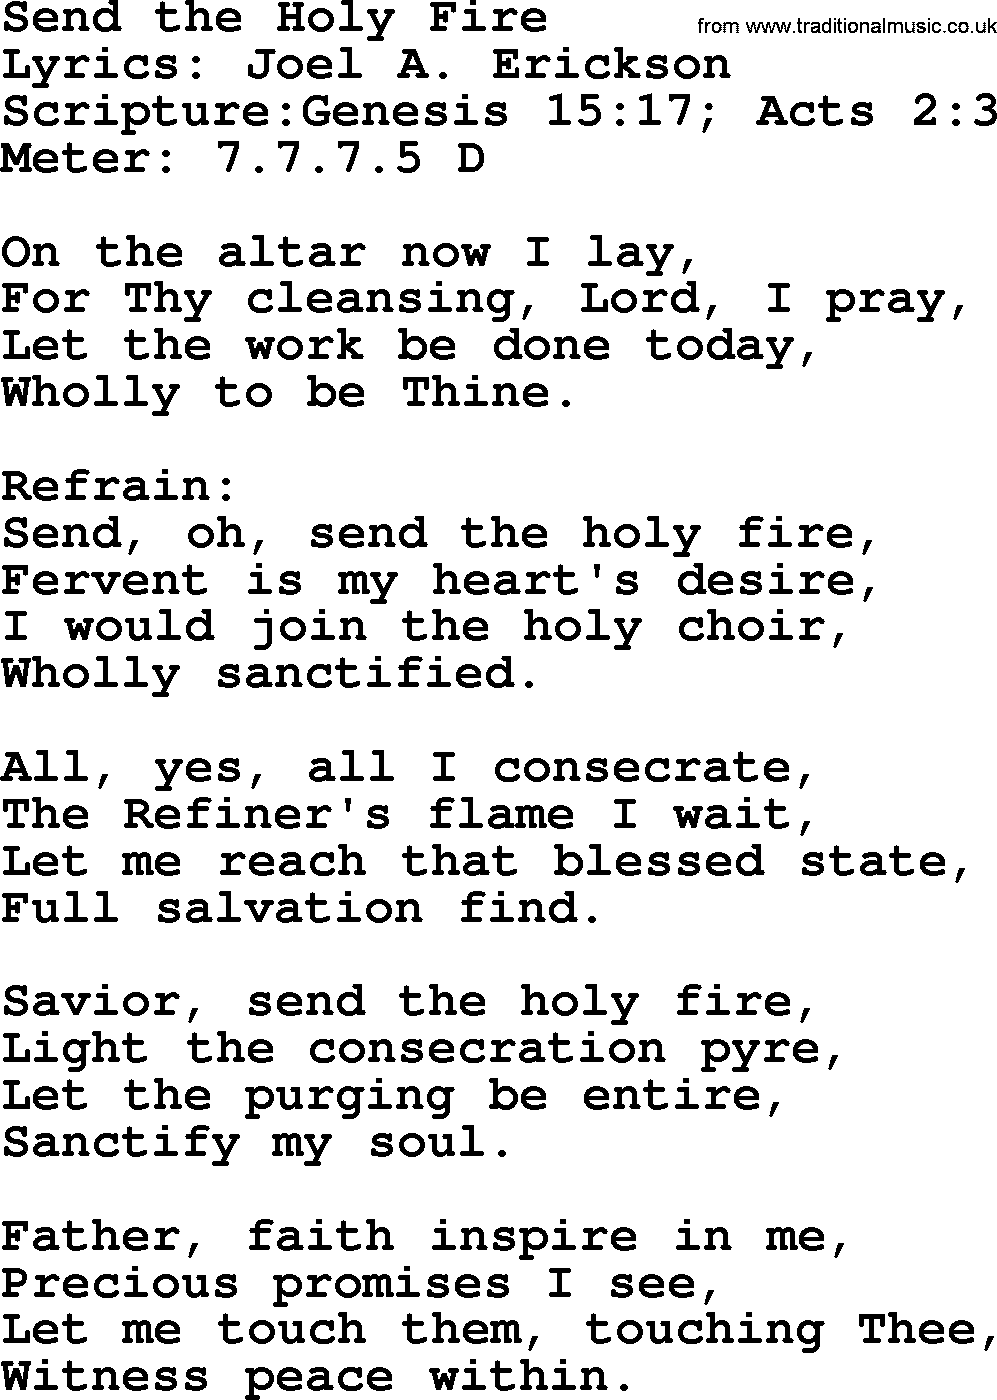 Hymns about  Angels, Hymn: Send the Holy Fire, lyrics, sheet music, midi & Mp3 music with PDF